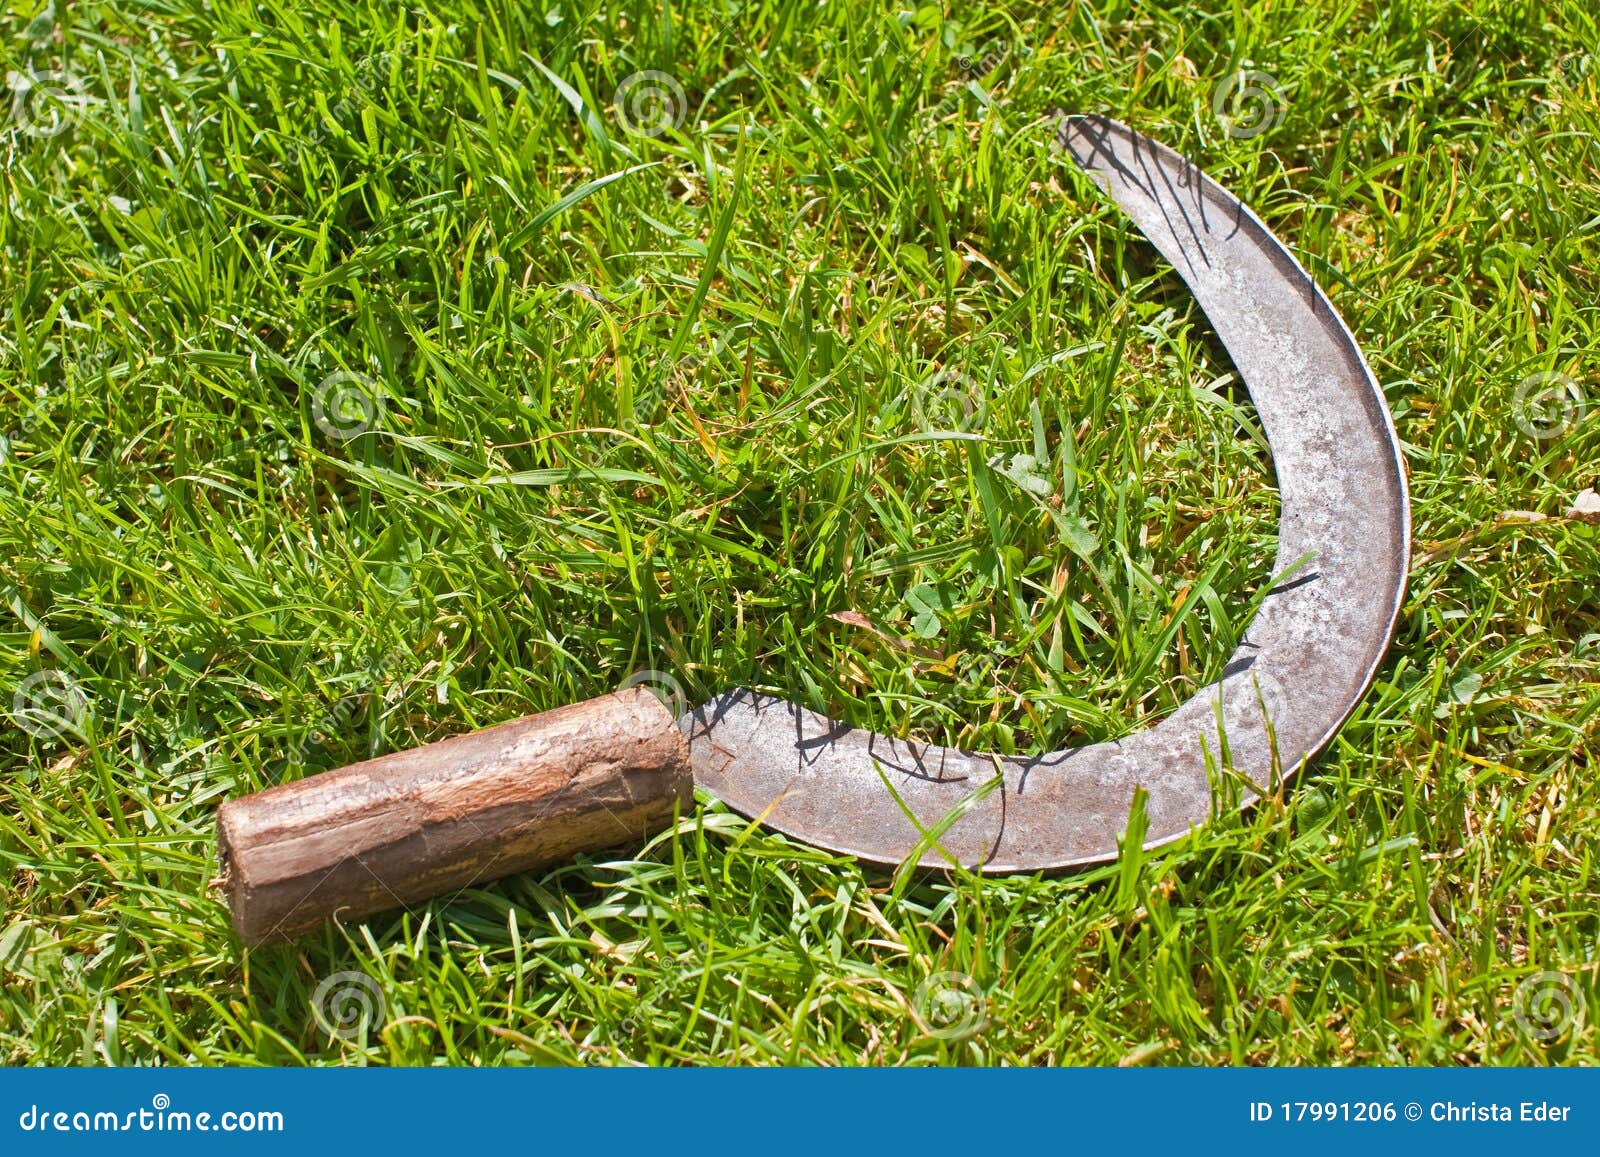 Image of Traditional sickle grass cutter